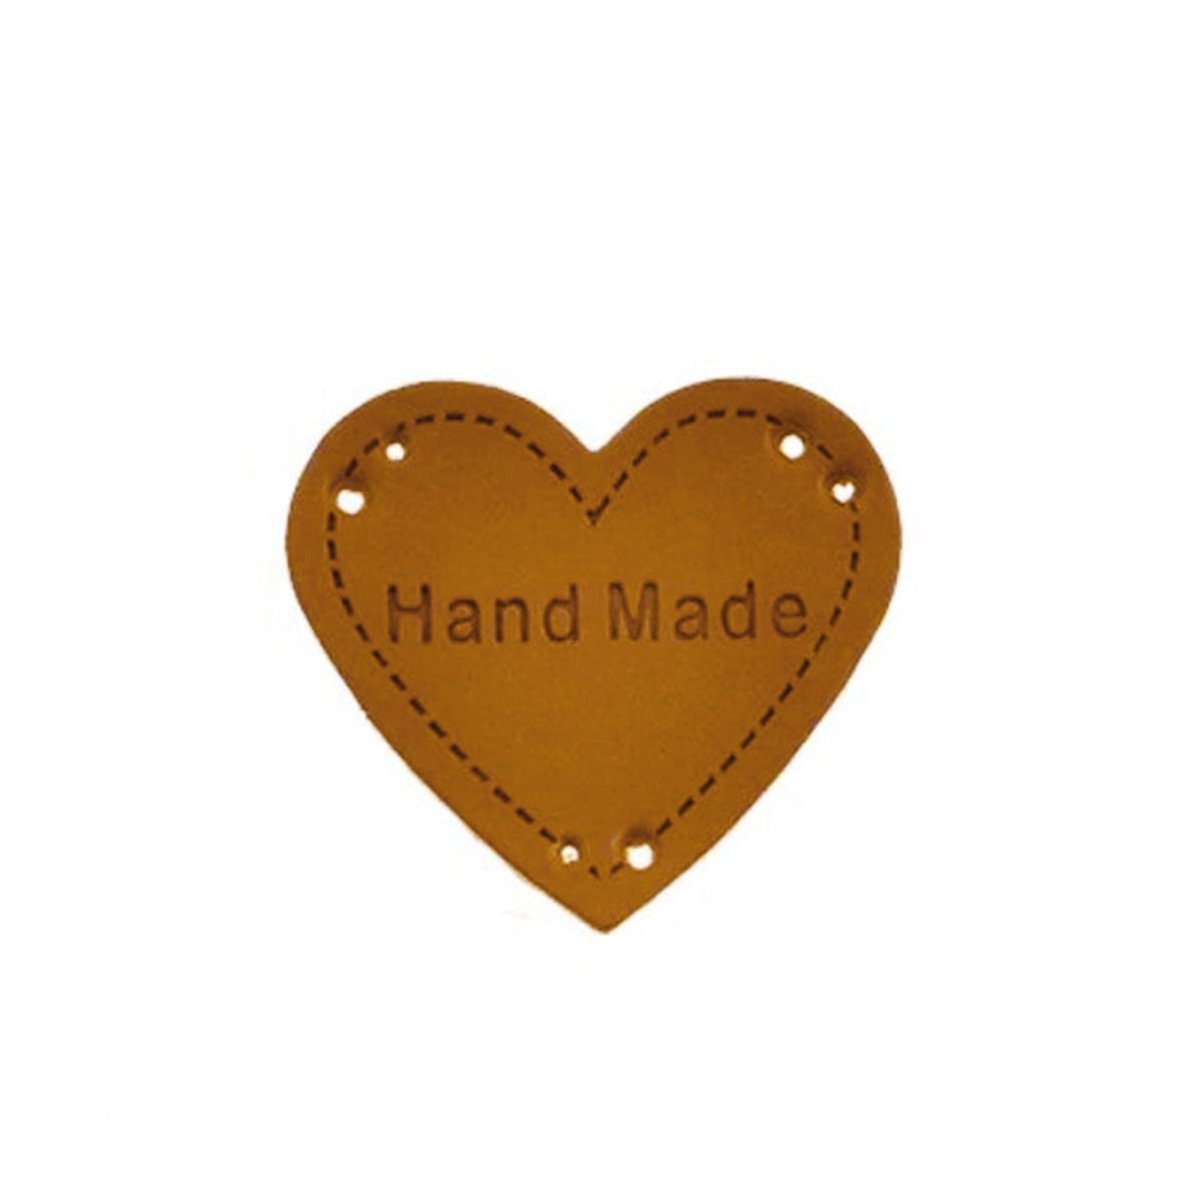 50pcs Heart Shape Faux Leather Patch Clothing Labels for Handmade Clothes Goods Sewing Tags Hand Made Brown PU Leather Applique - Asia Sell